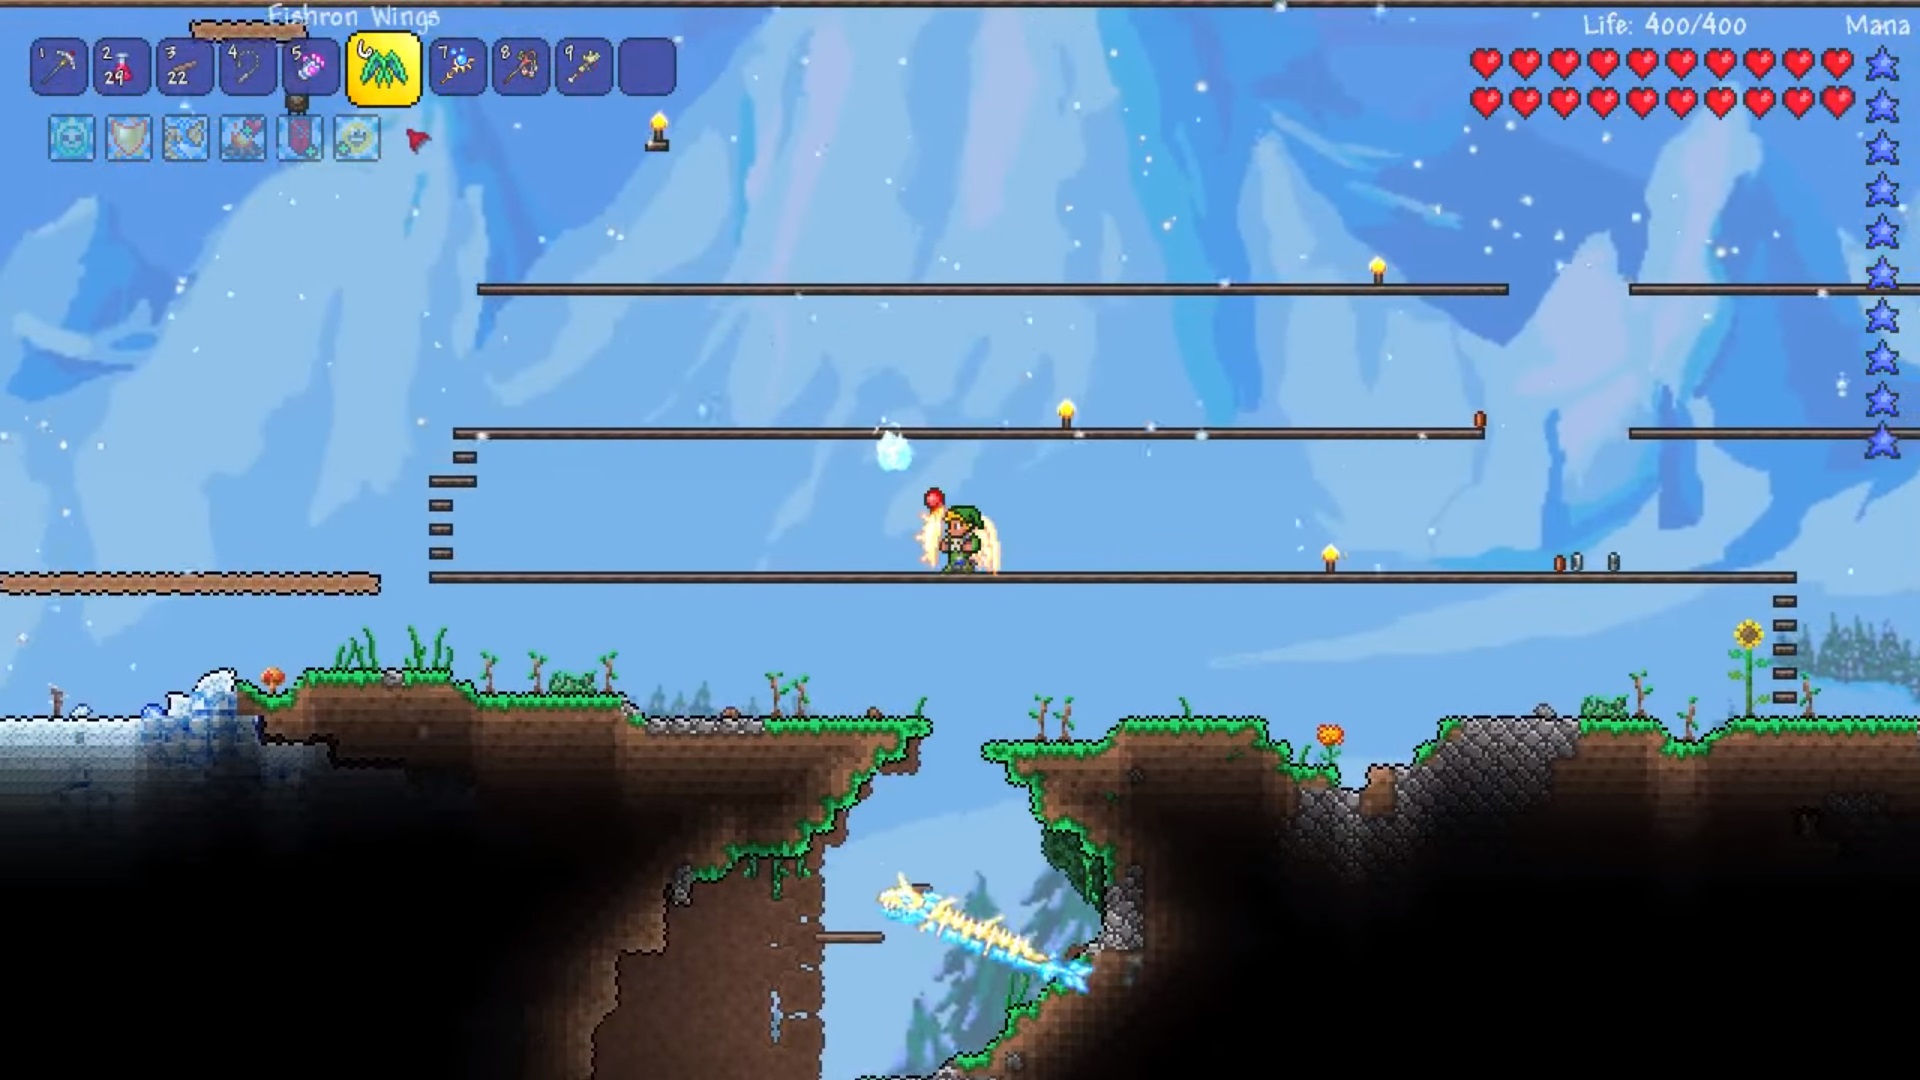 The Solar Terraria wings in action